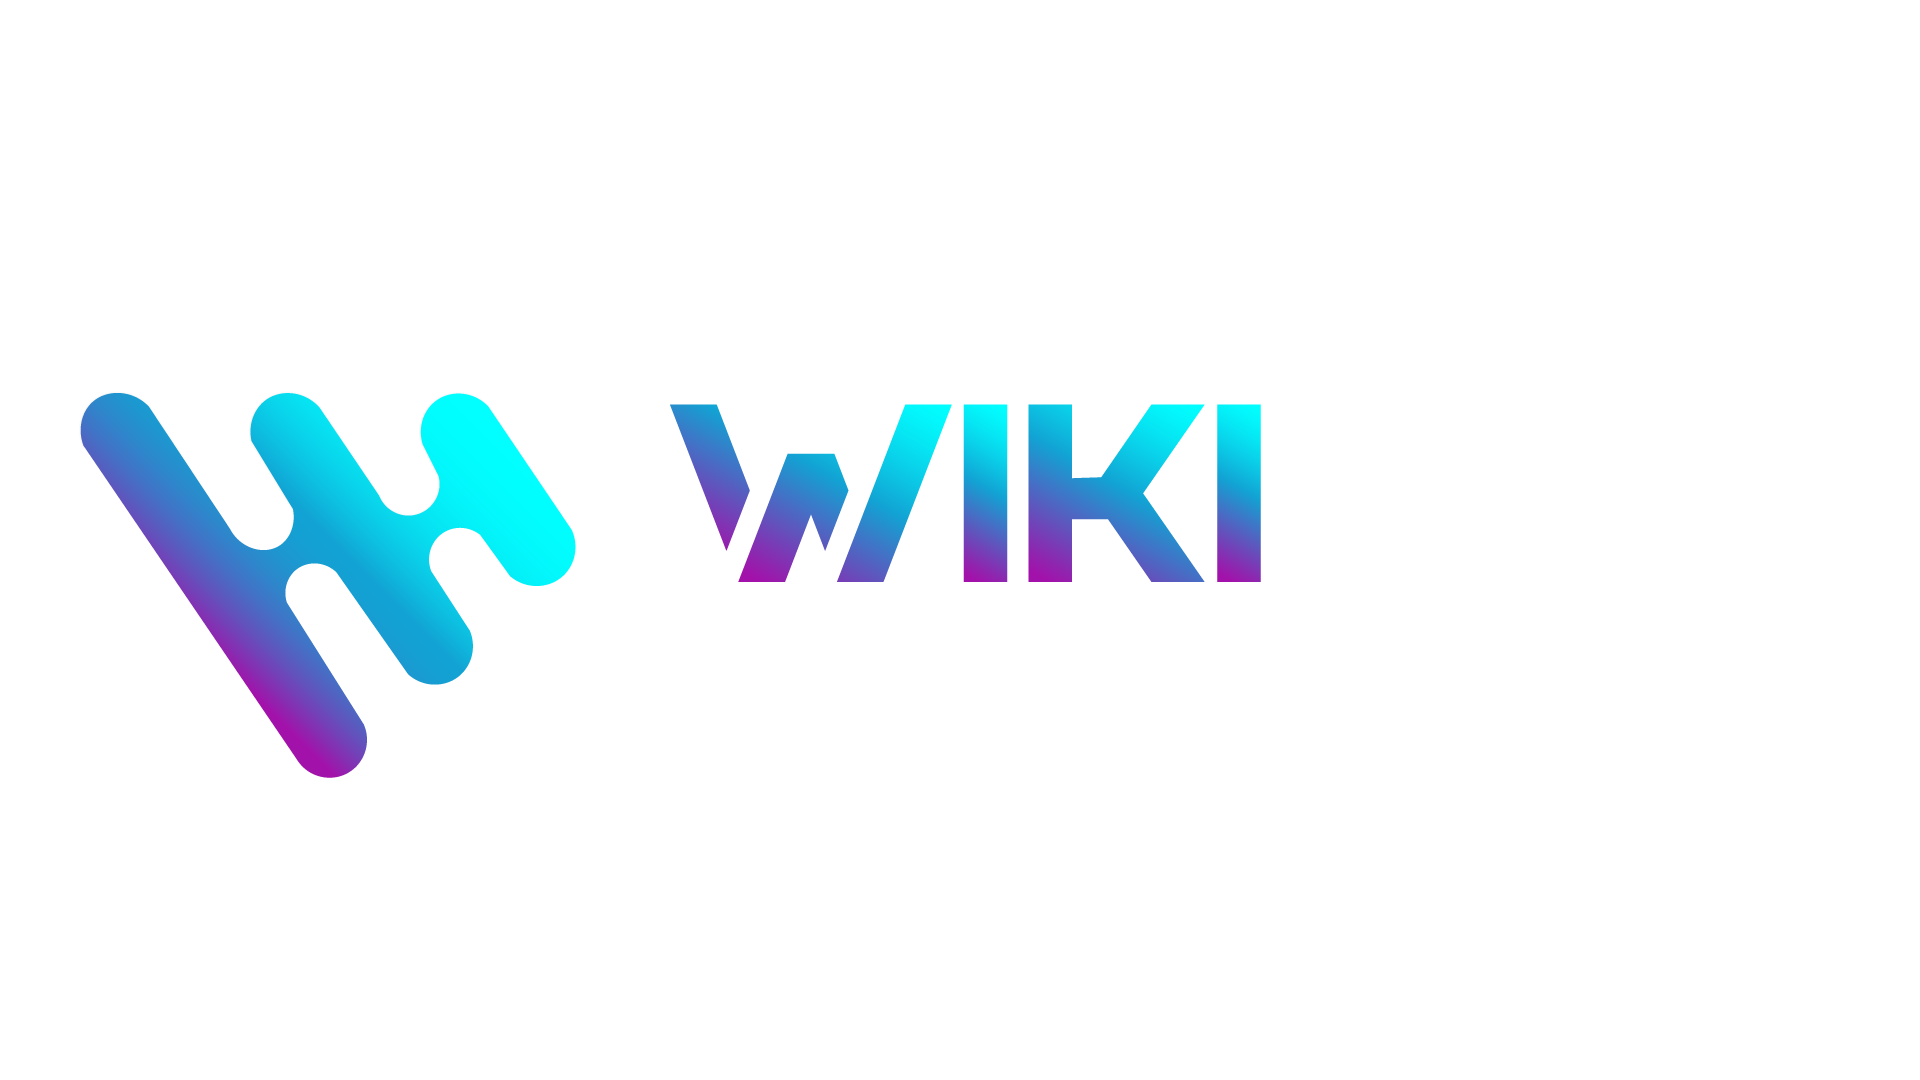 Film streaming | Serie streaming | wikiseriestreaming.org | Stream complet